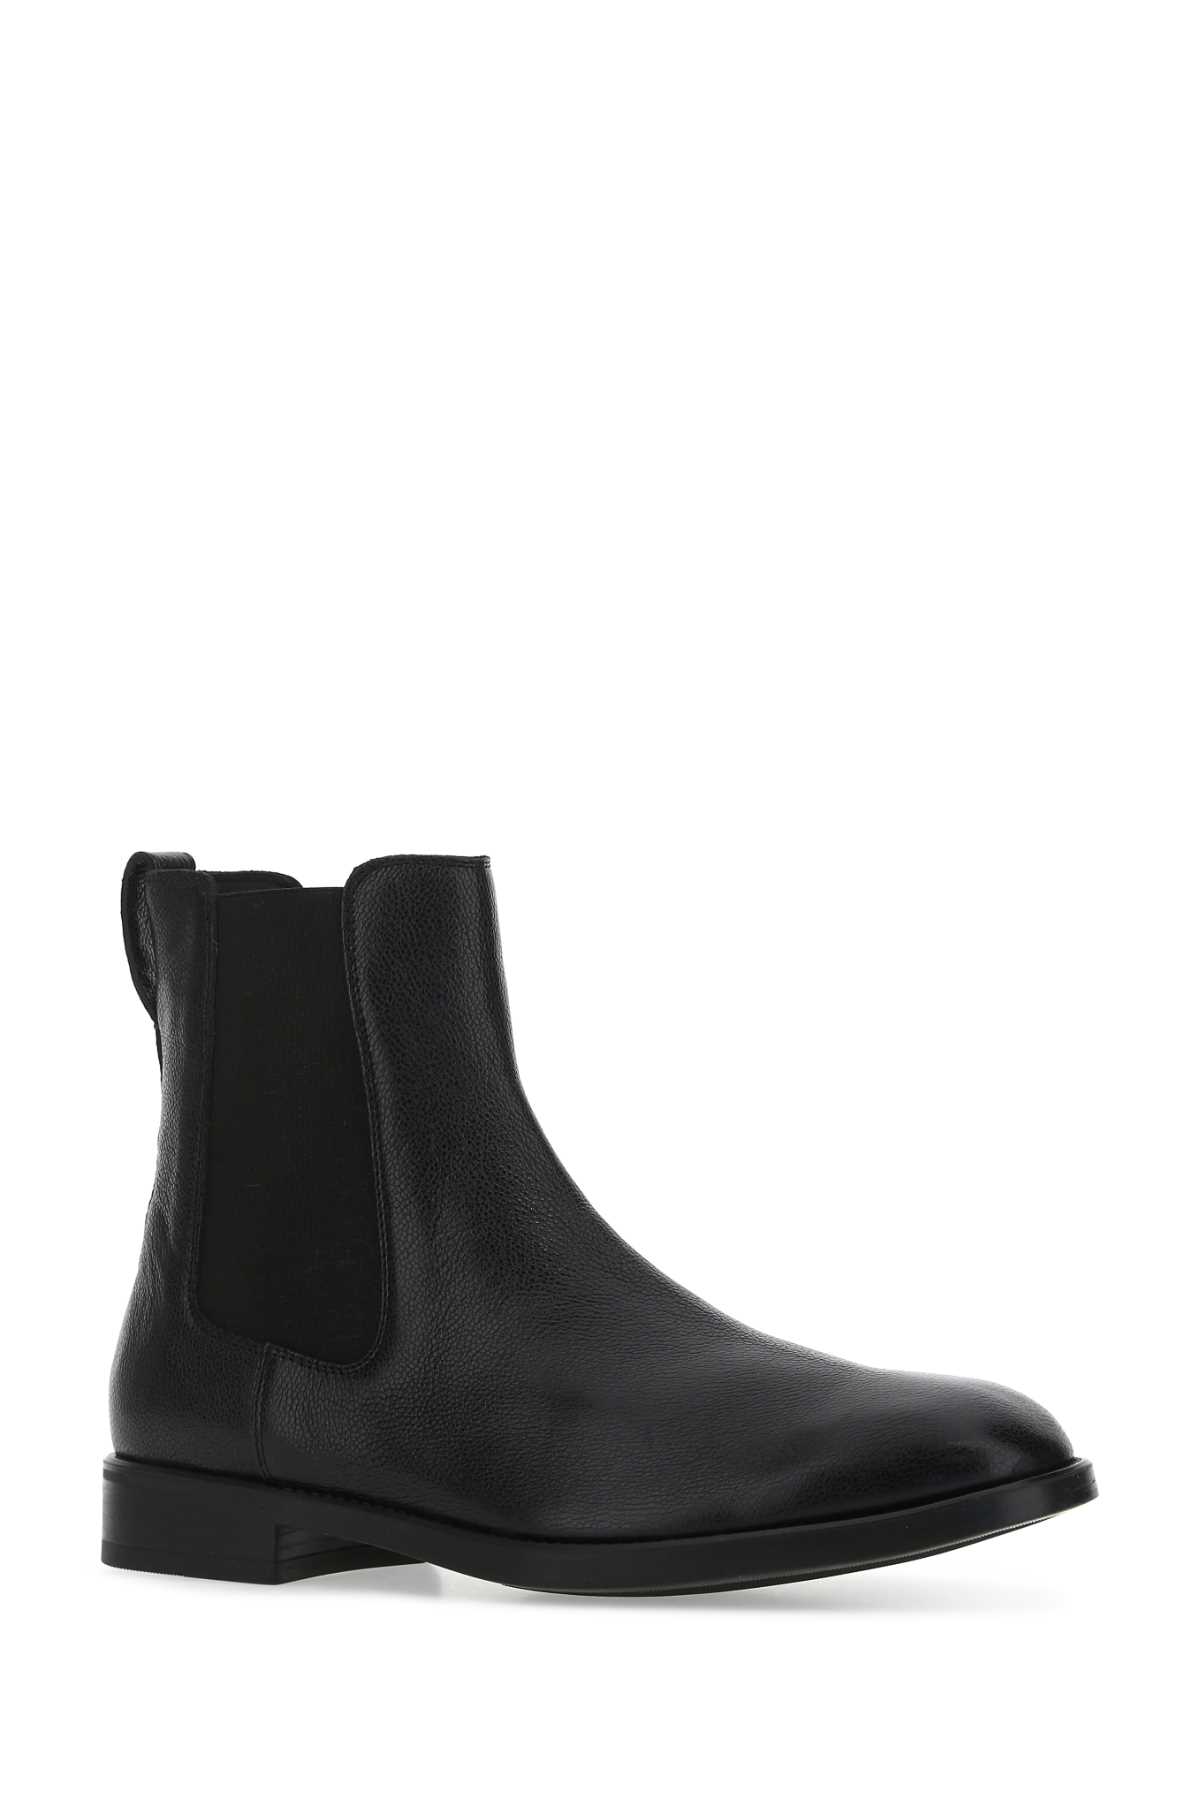 Tom Ford Black Leather Ankle Boots In U9000